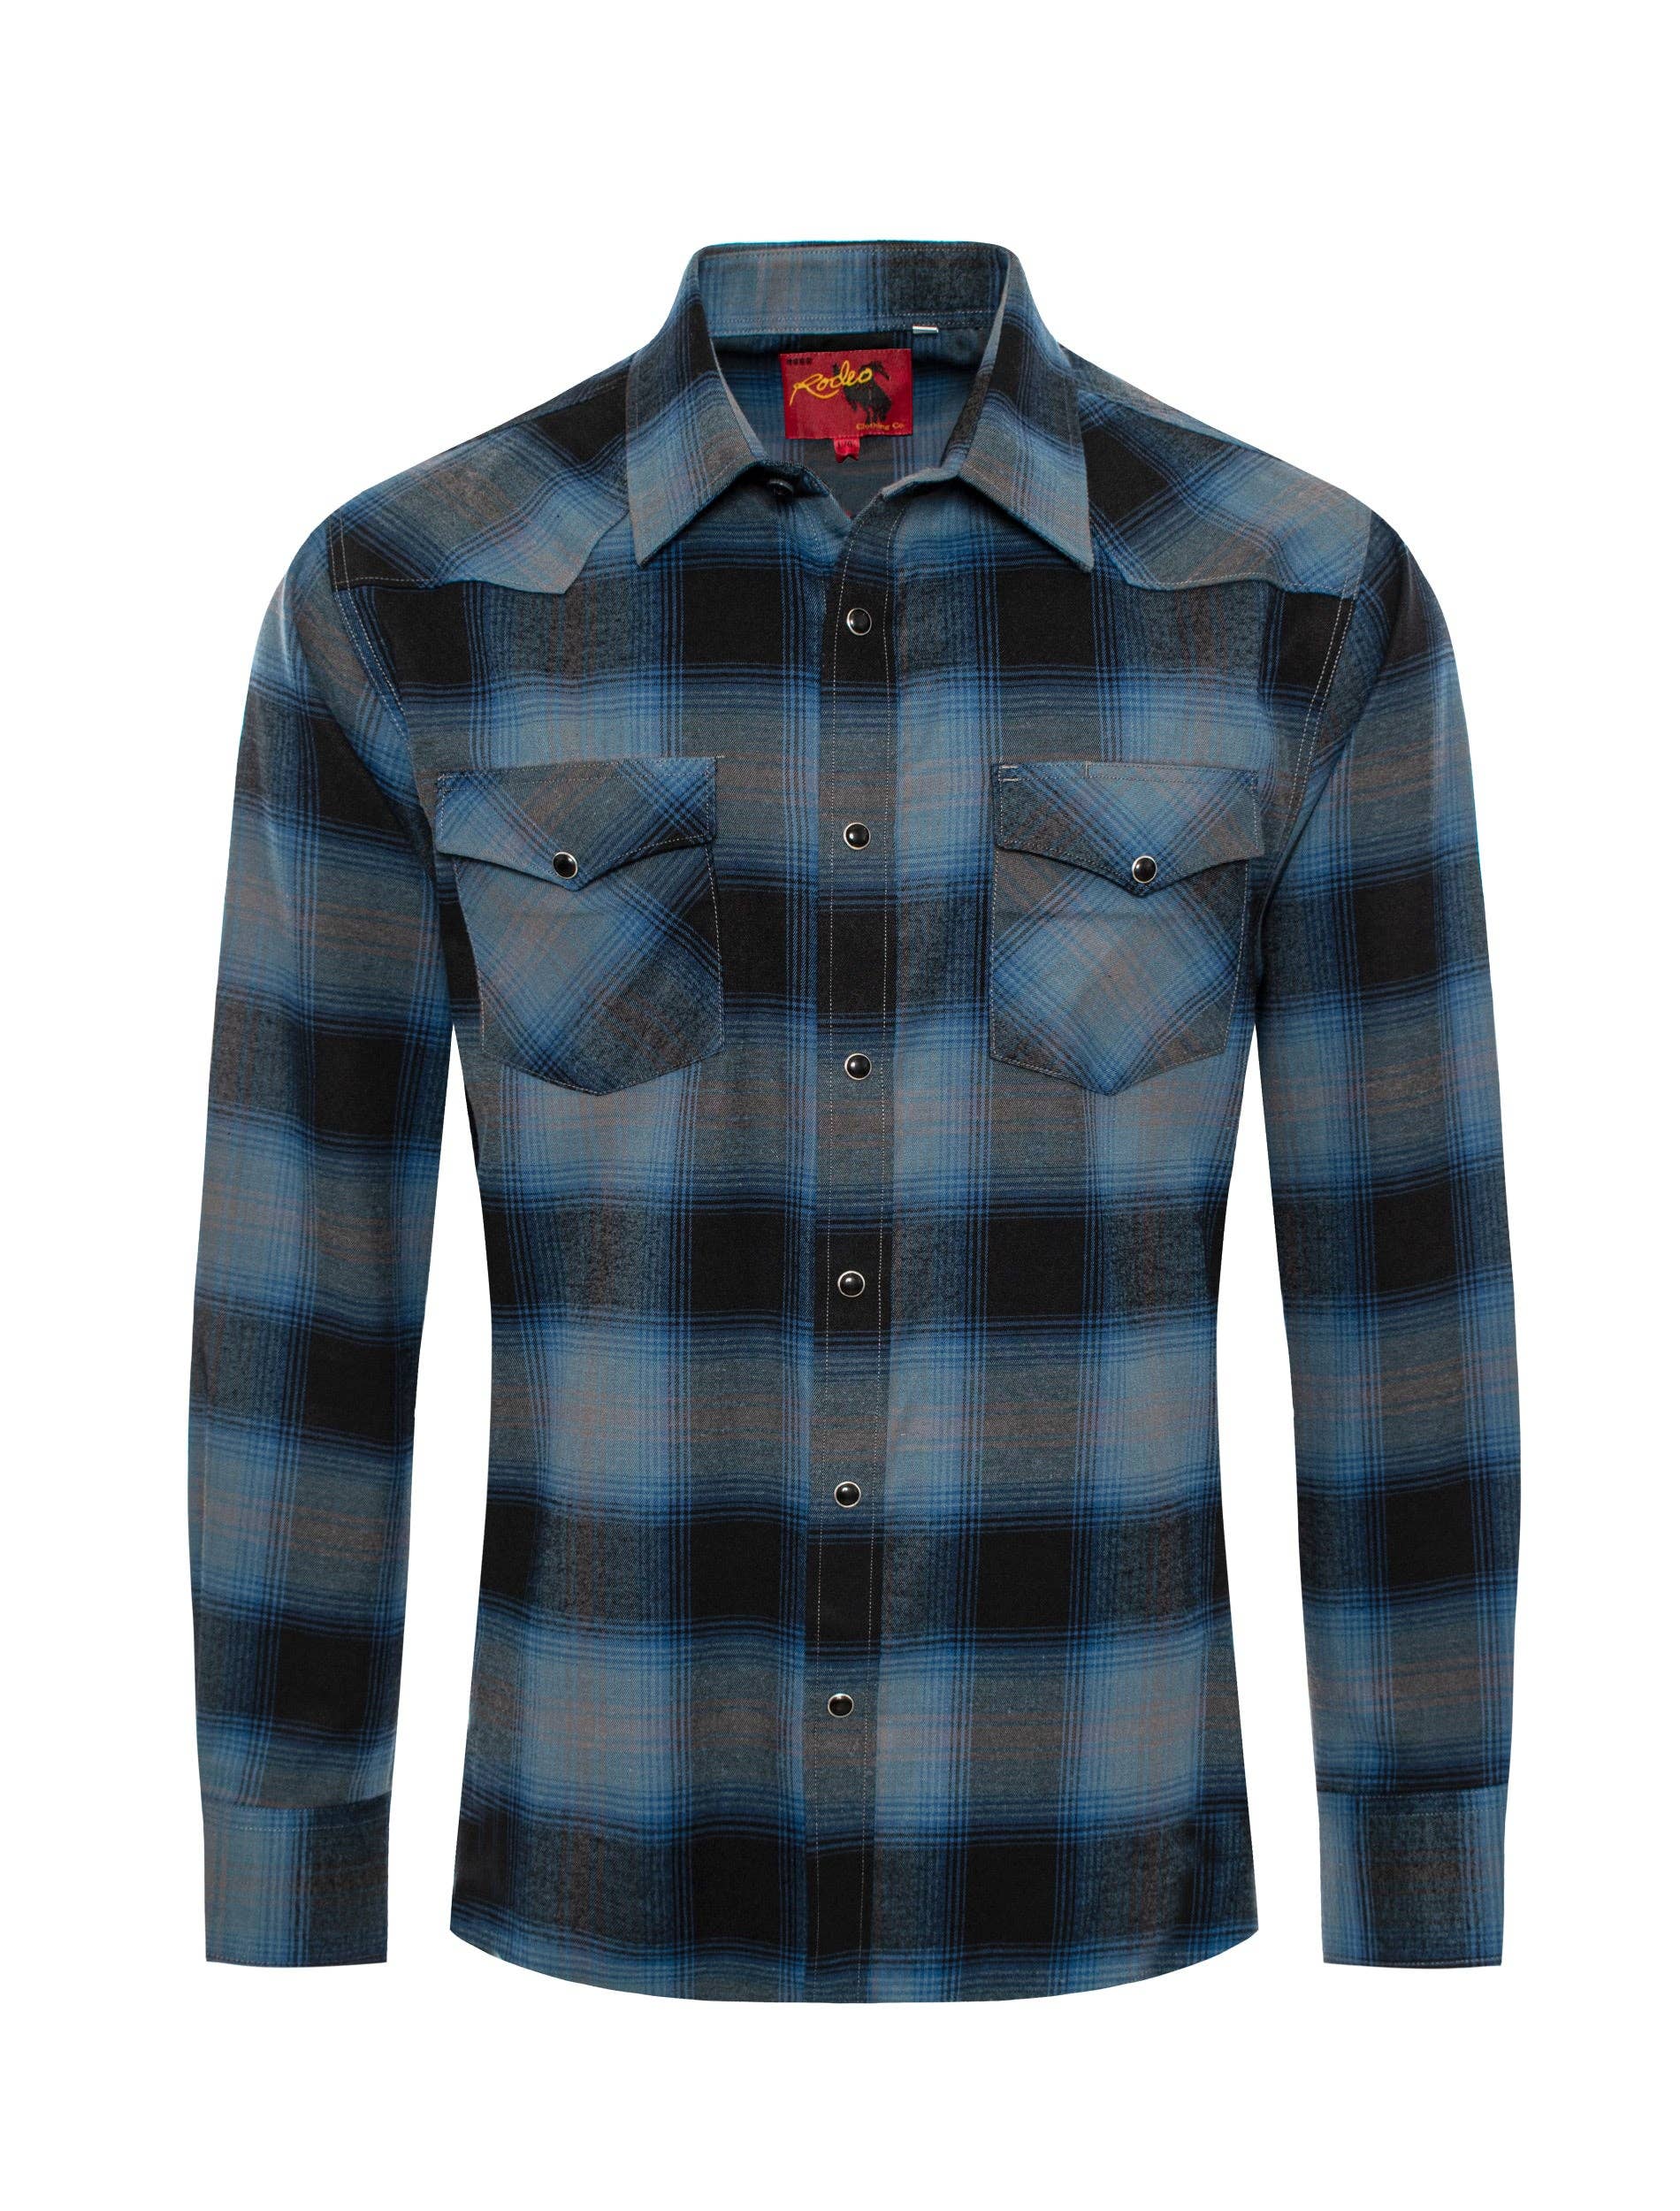 Rodeo Clothing - Men's Western Long Sleeve Flannel Shirts With Snap Buttons